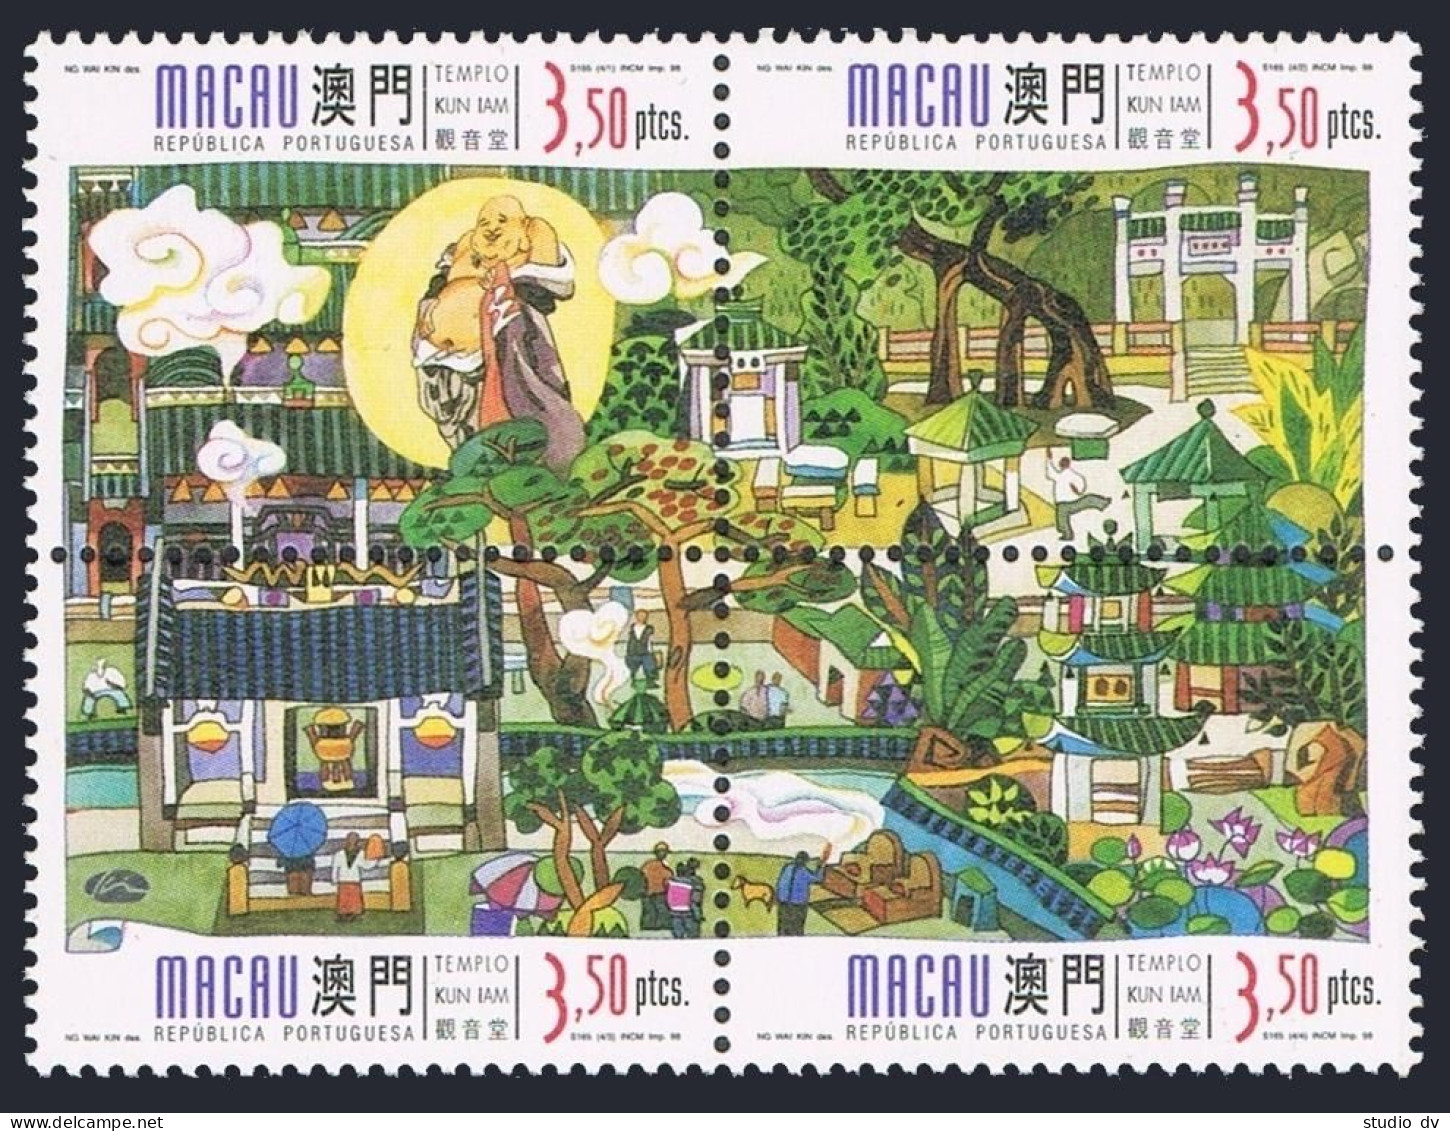 Macao 952-955a Block,956,956a Overprinted,MNH. Kun Iam Temple,1998.Table,Chairs, - Neufs